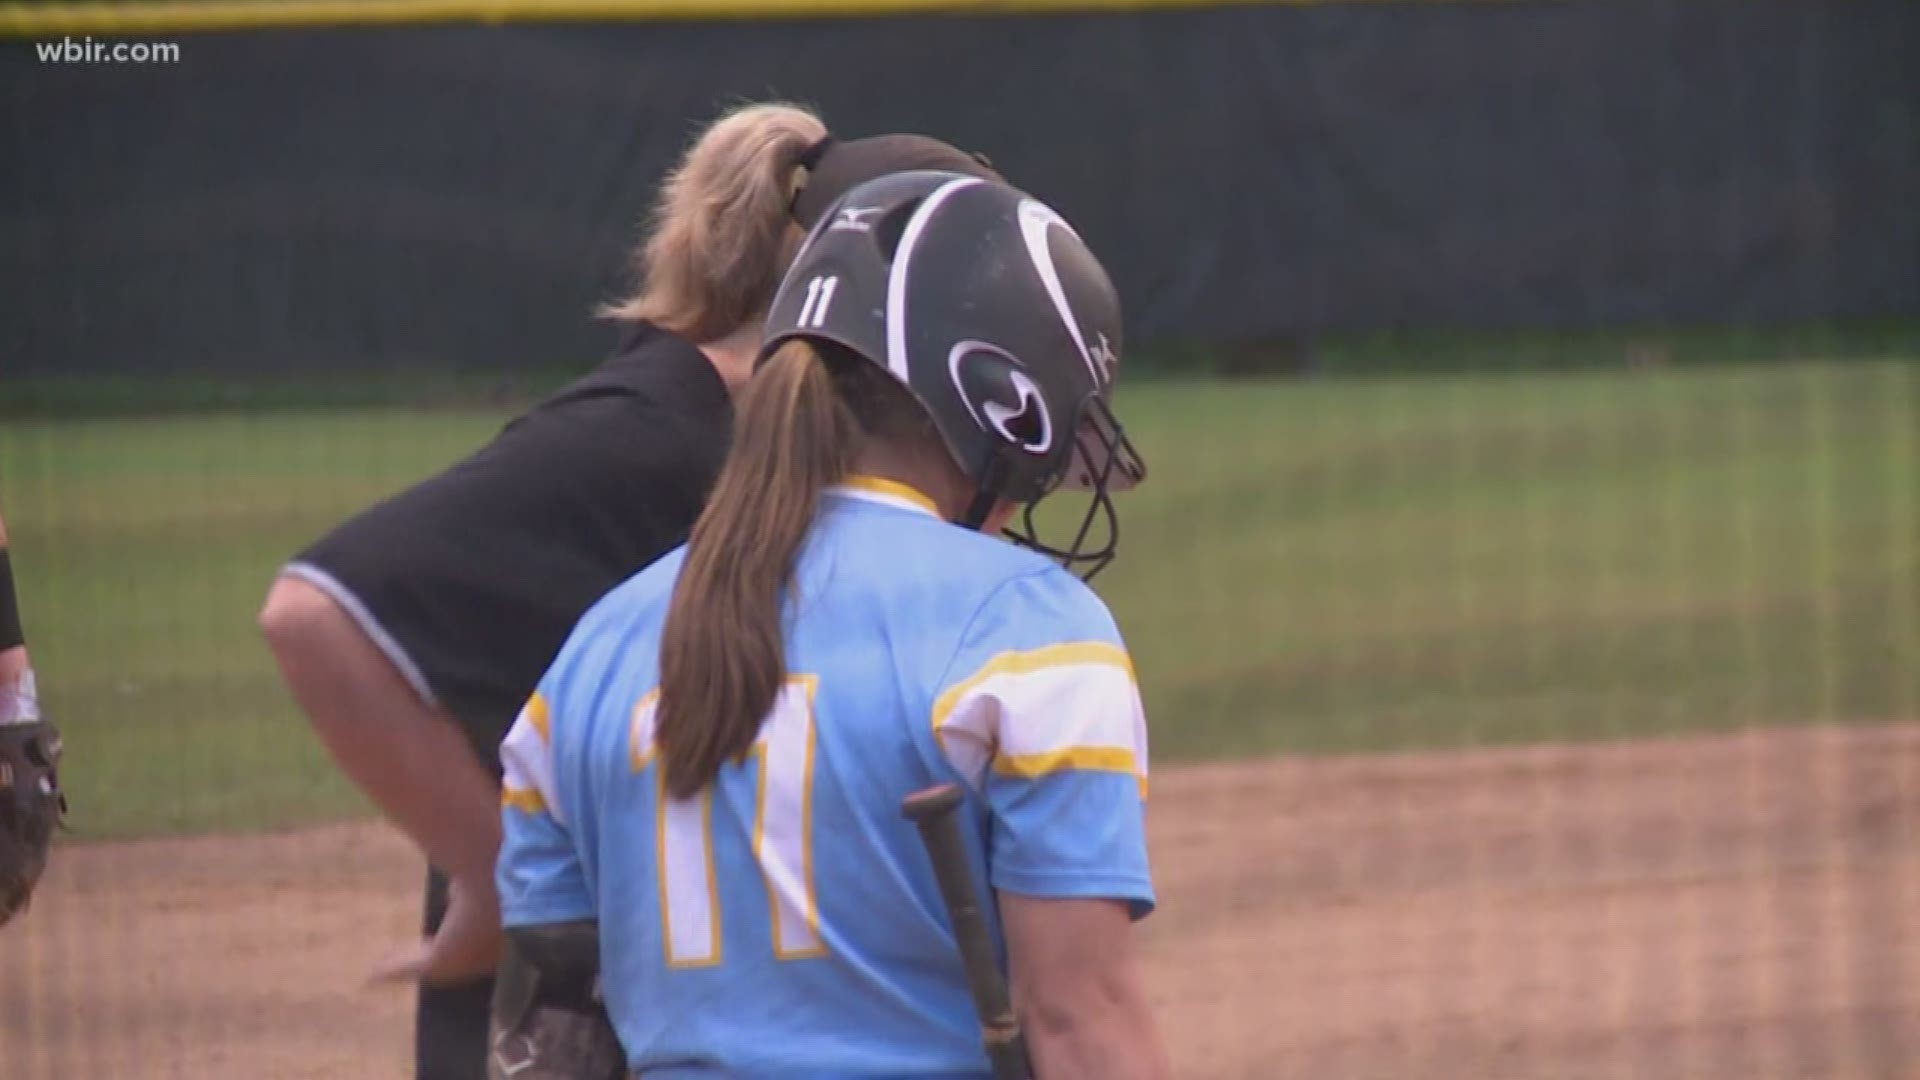 Gibbs softball will have a chance to defend its state championship in Murfreesboro thanks to a six-run two-out rally in the fourth inning. The Lady Eagles beat Elizabethton 8-3.